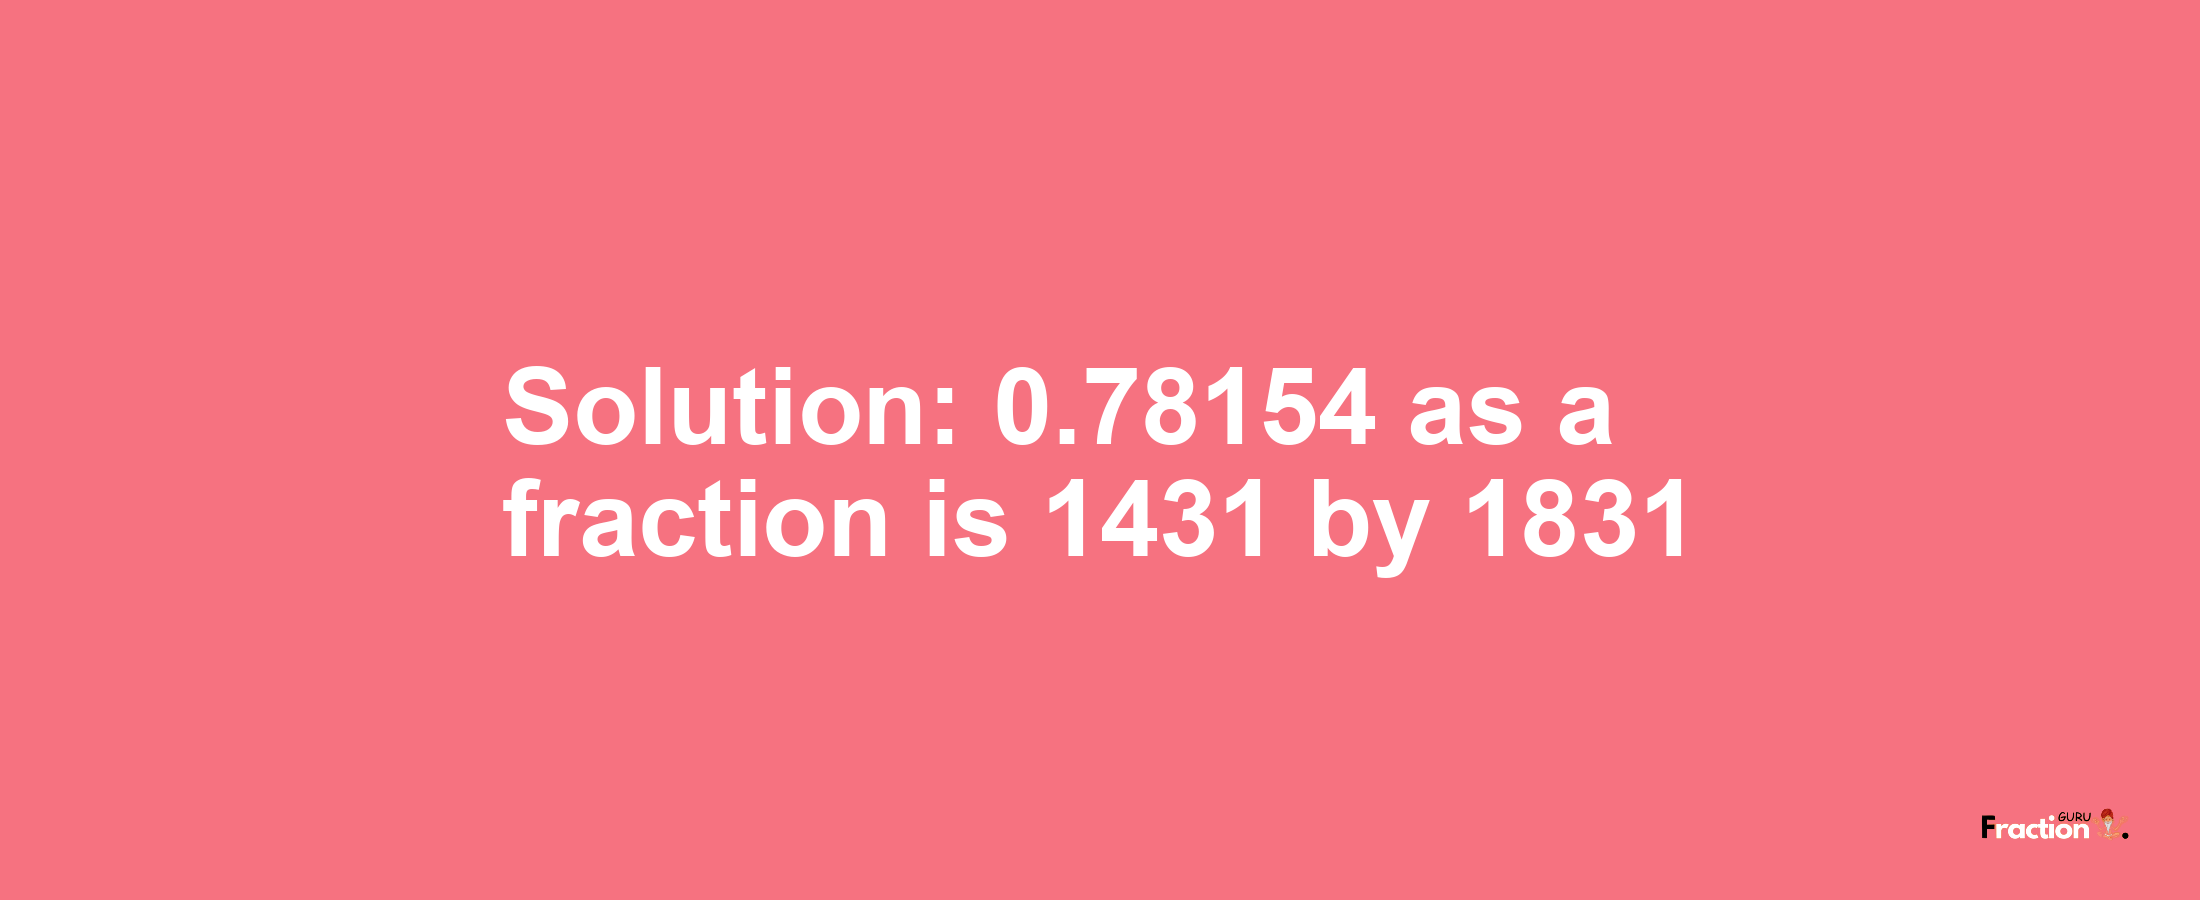 Solution:0.78154 as a fraction is 1431/1831